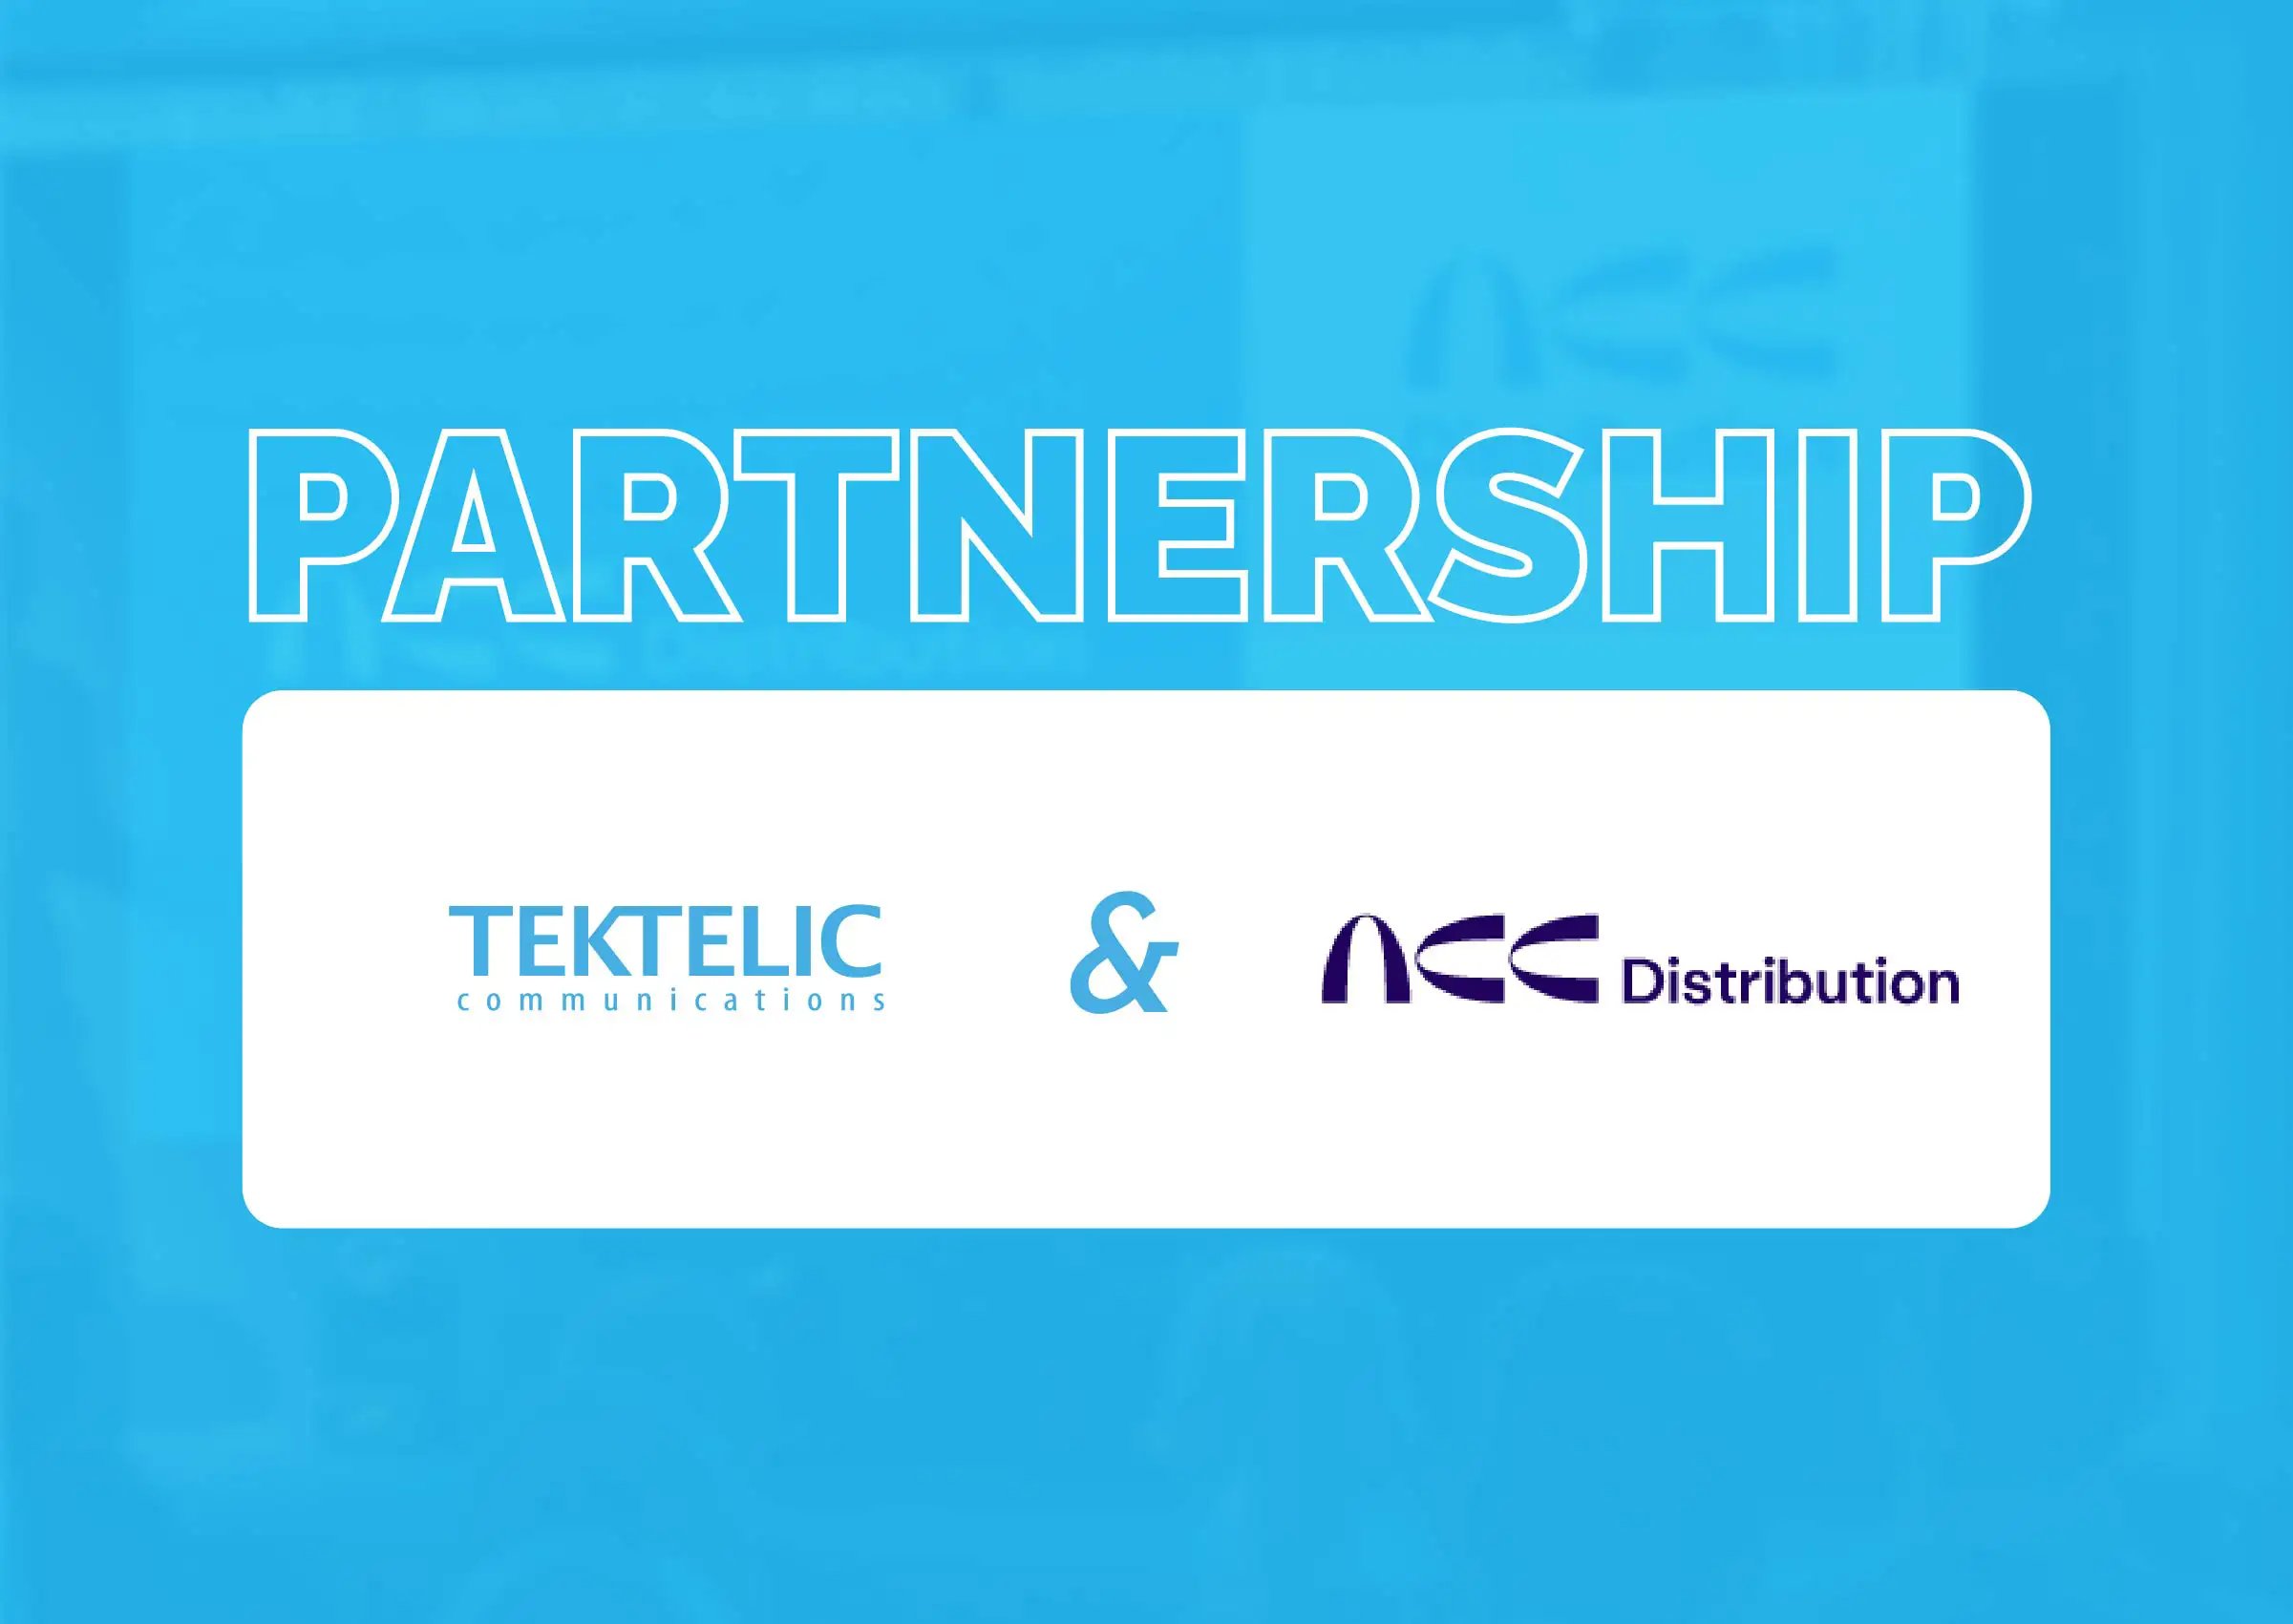 TEKTELIC and ACC Distribution sign agreement to bring best-in-class IoT Solution to the Baltic markets